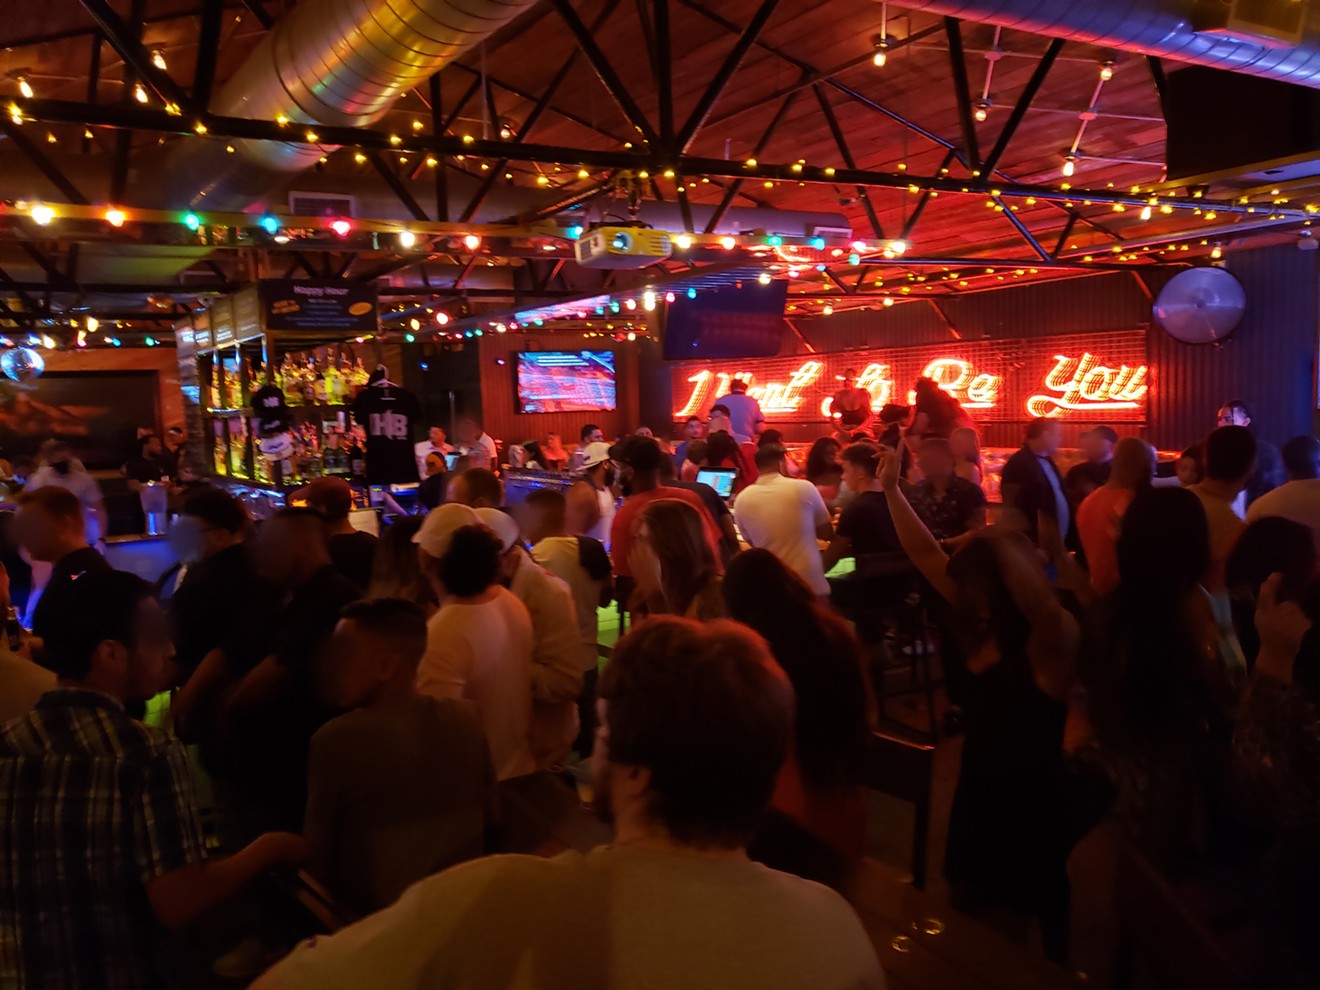 Handlebar in Houston was one of the 12 places to receive a 30-day permit suspension.